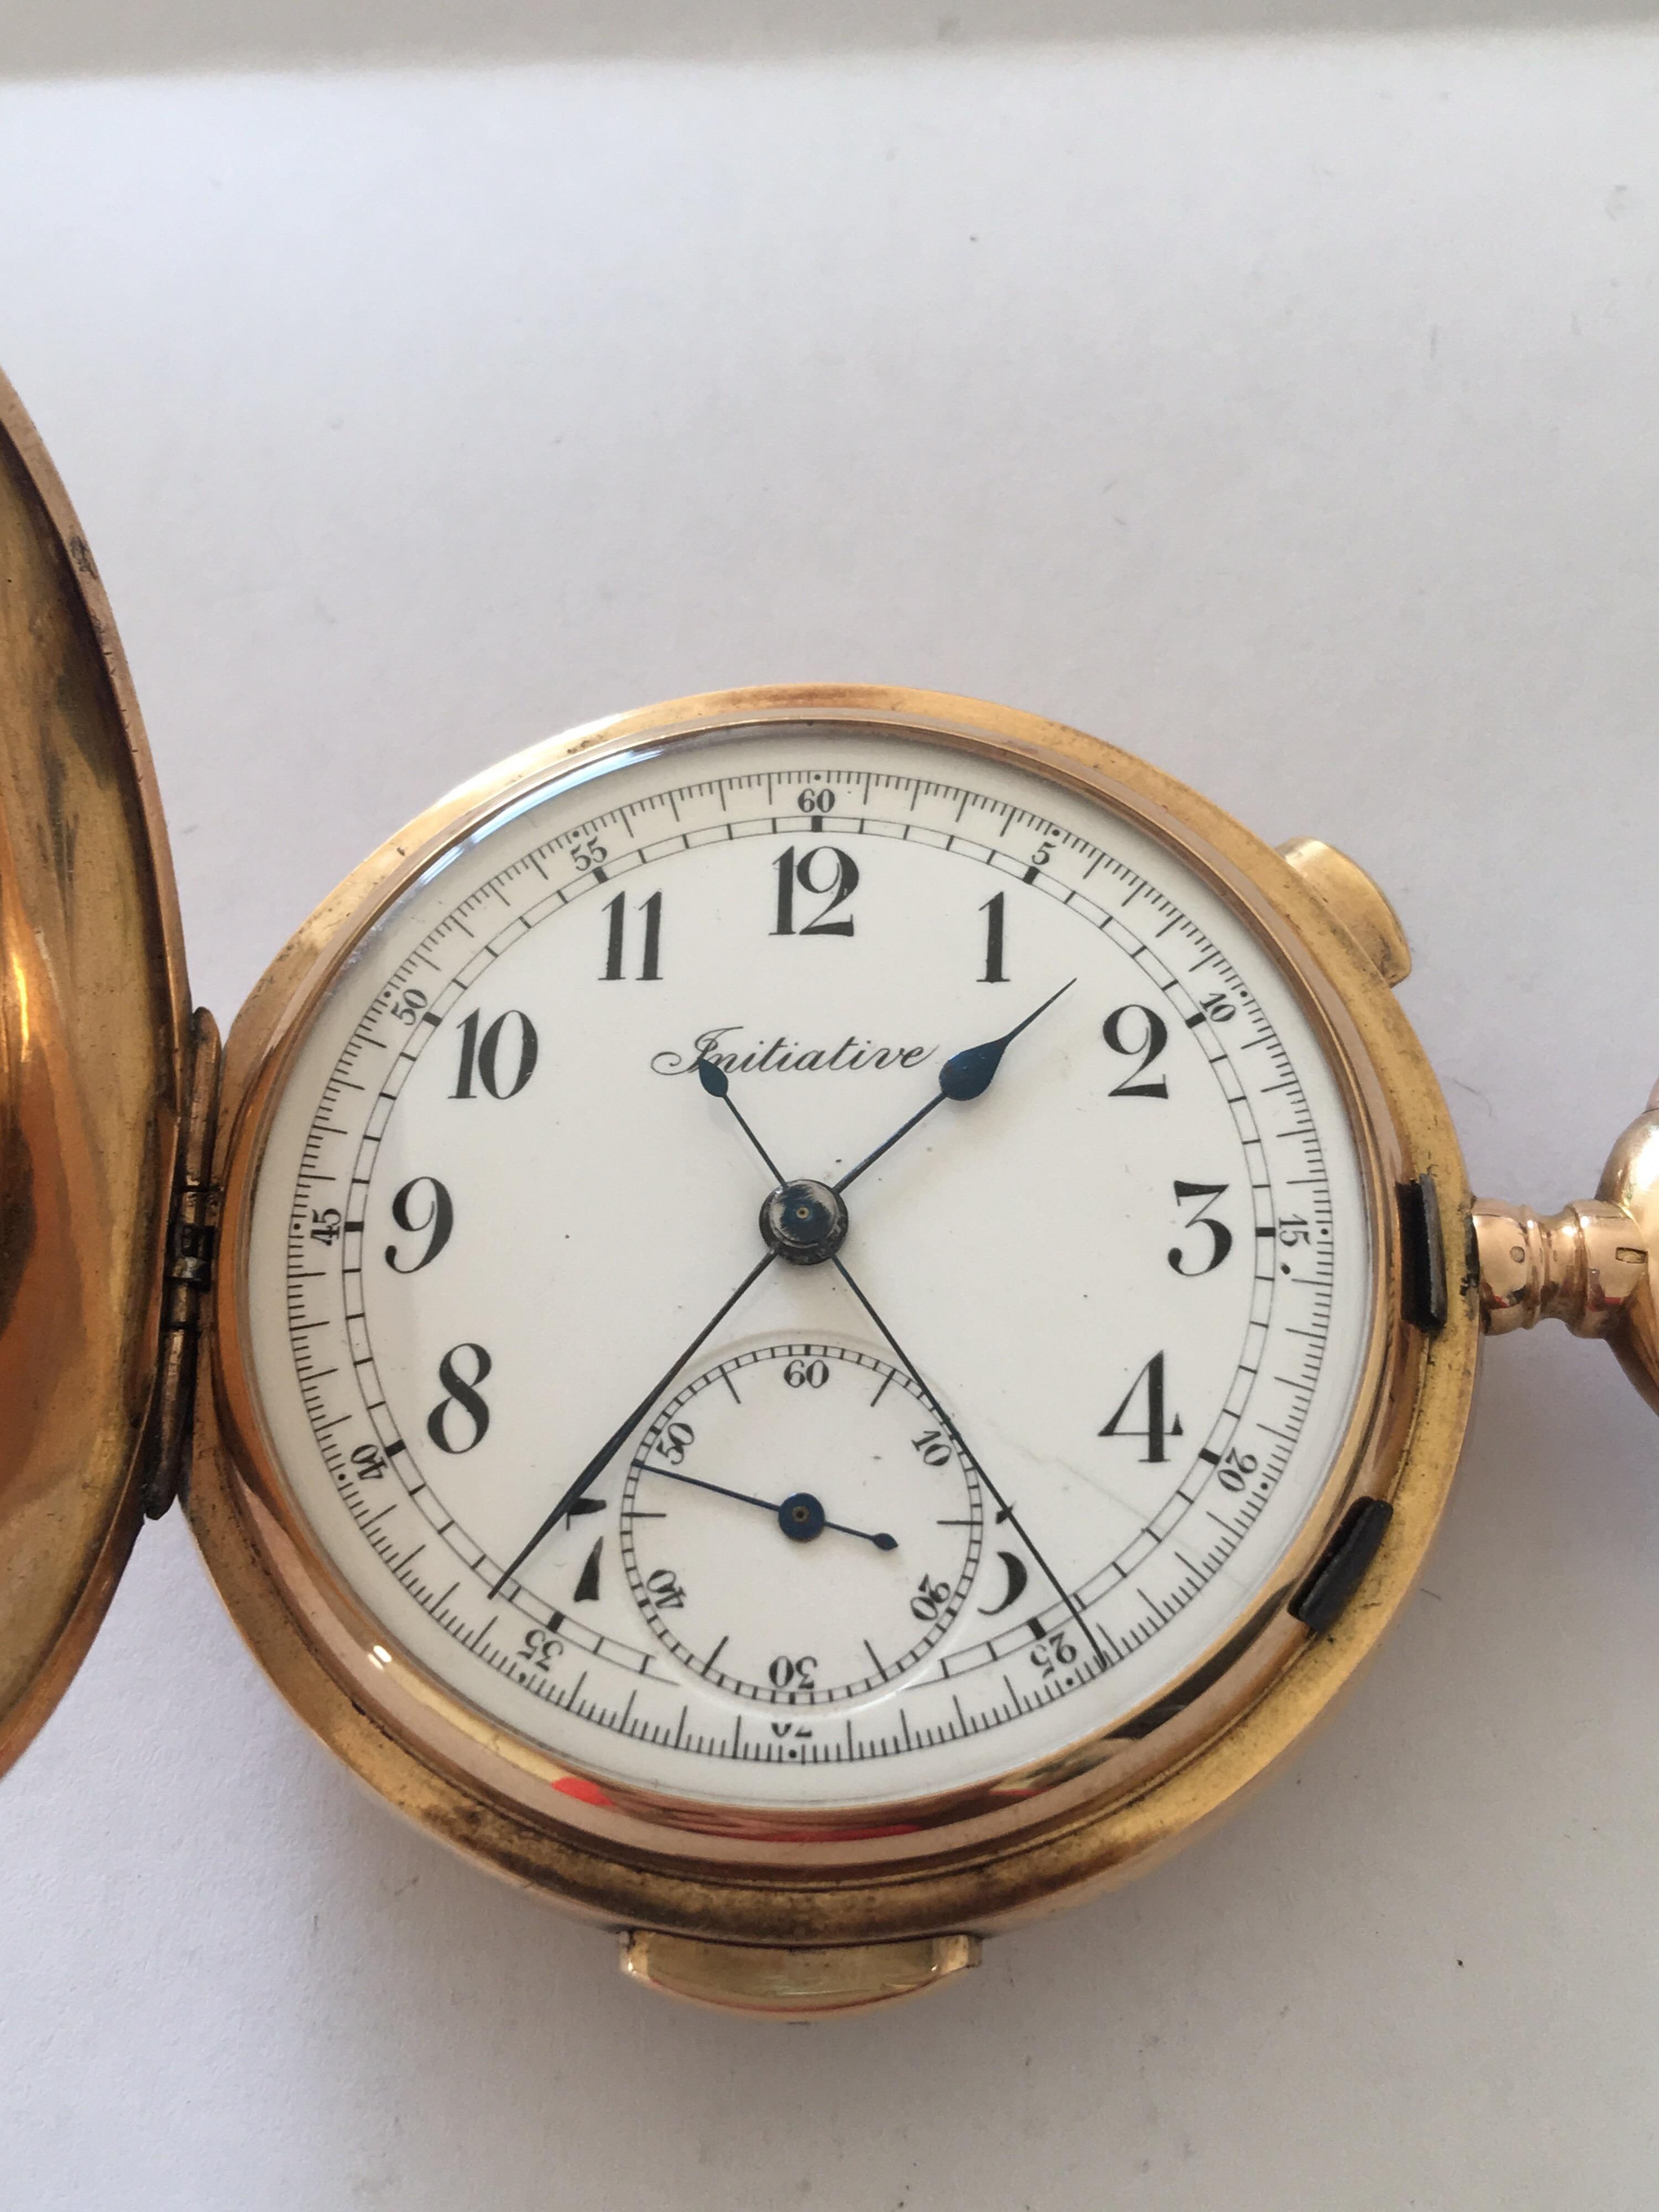 18k Gold Full Hunter Quarter Repeater Chronograph Pocket Watch Signed Initiative 1